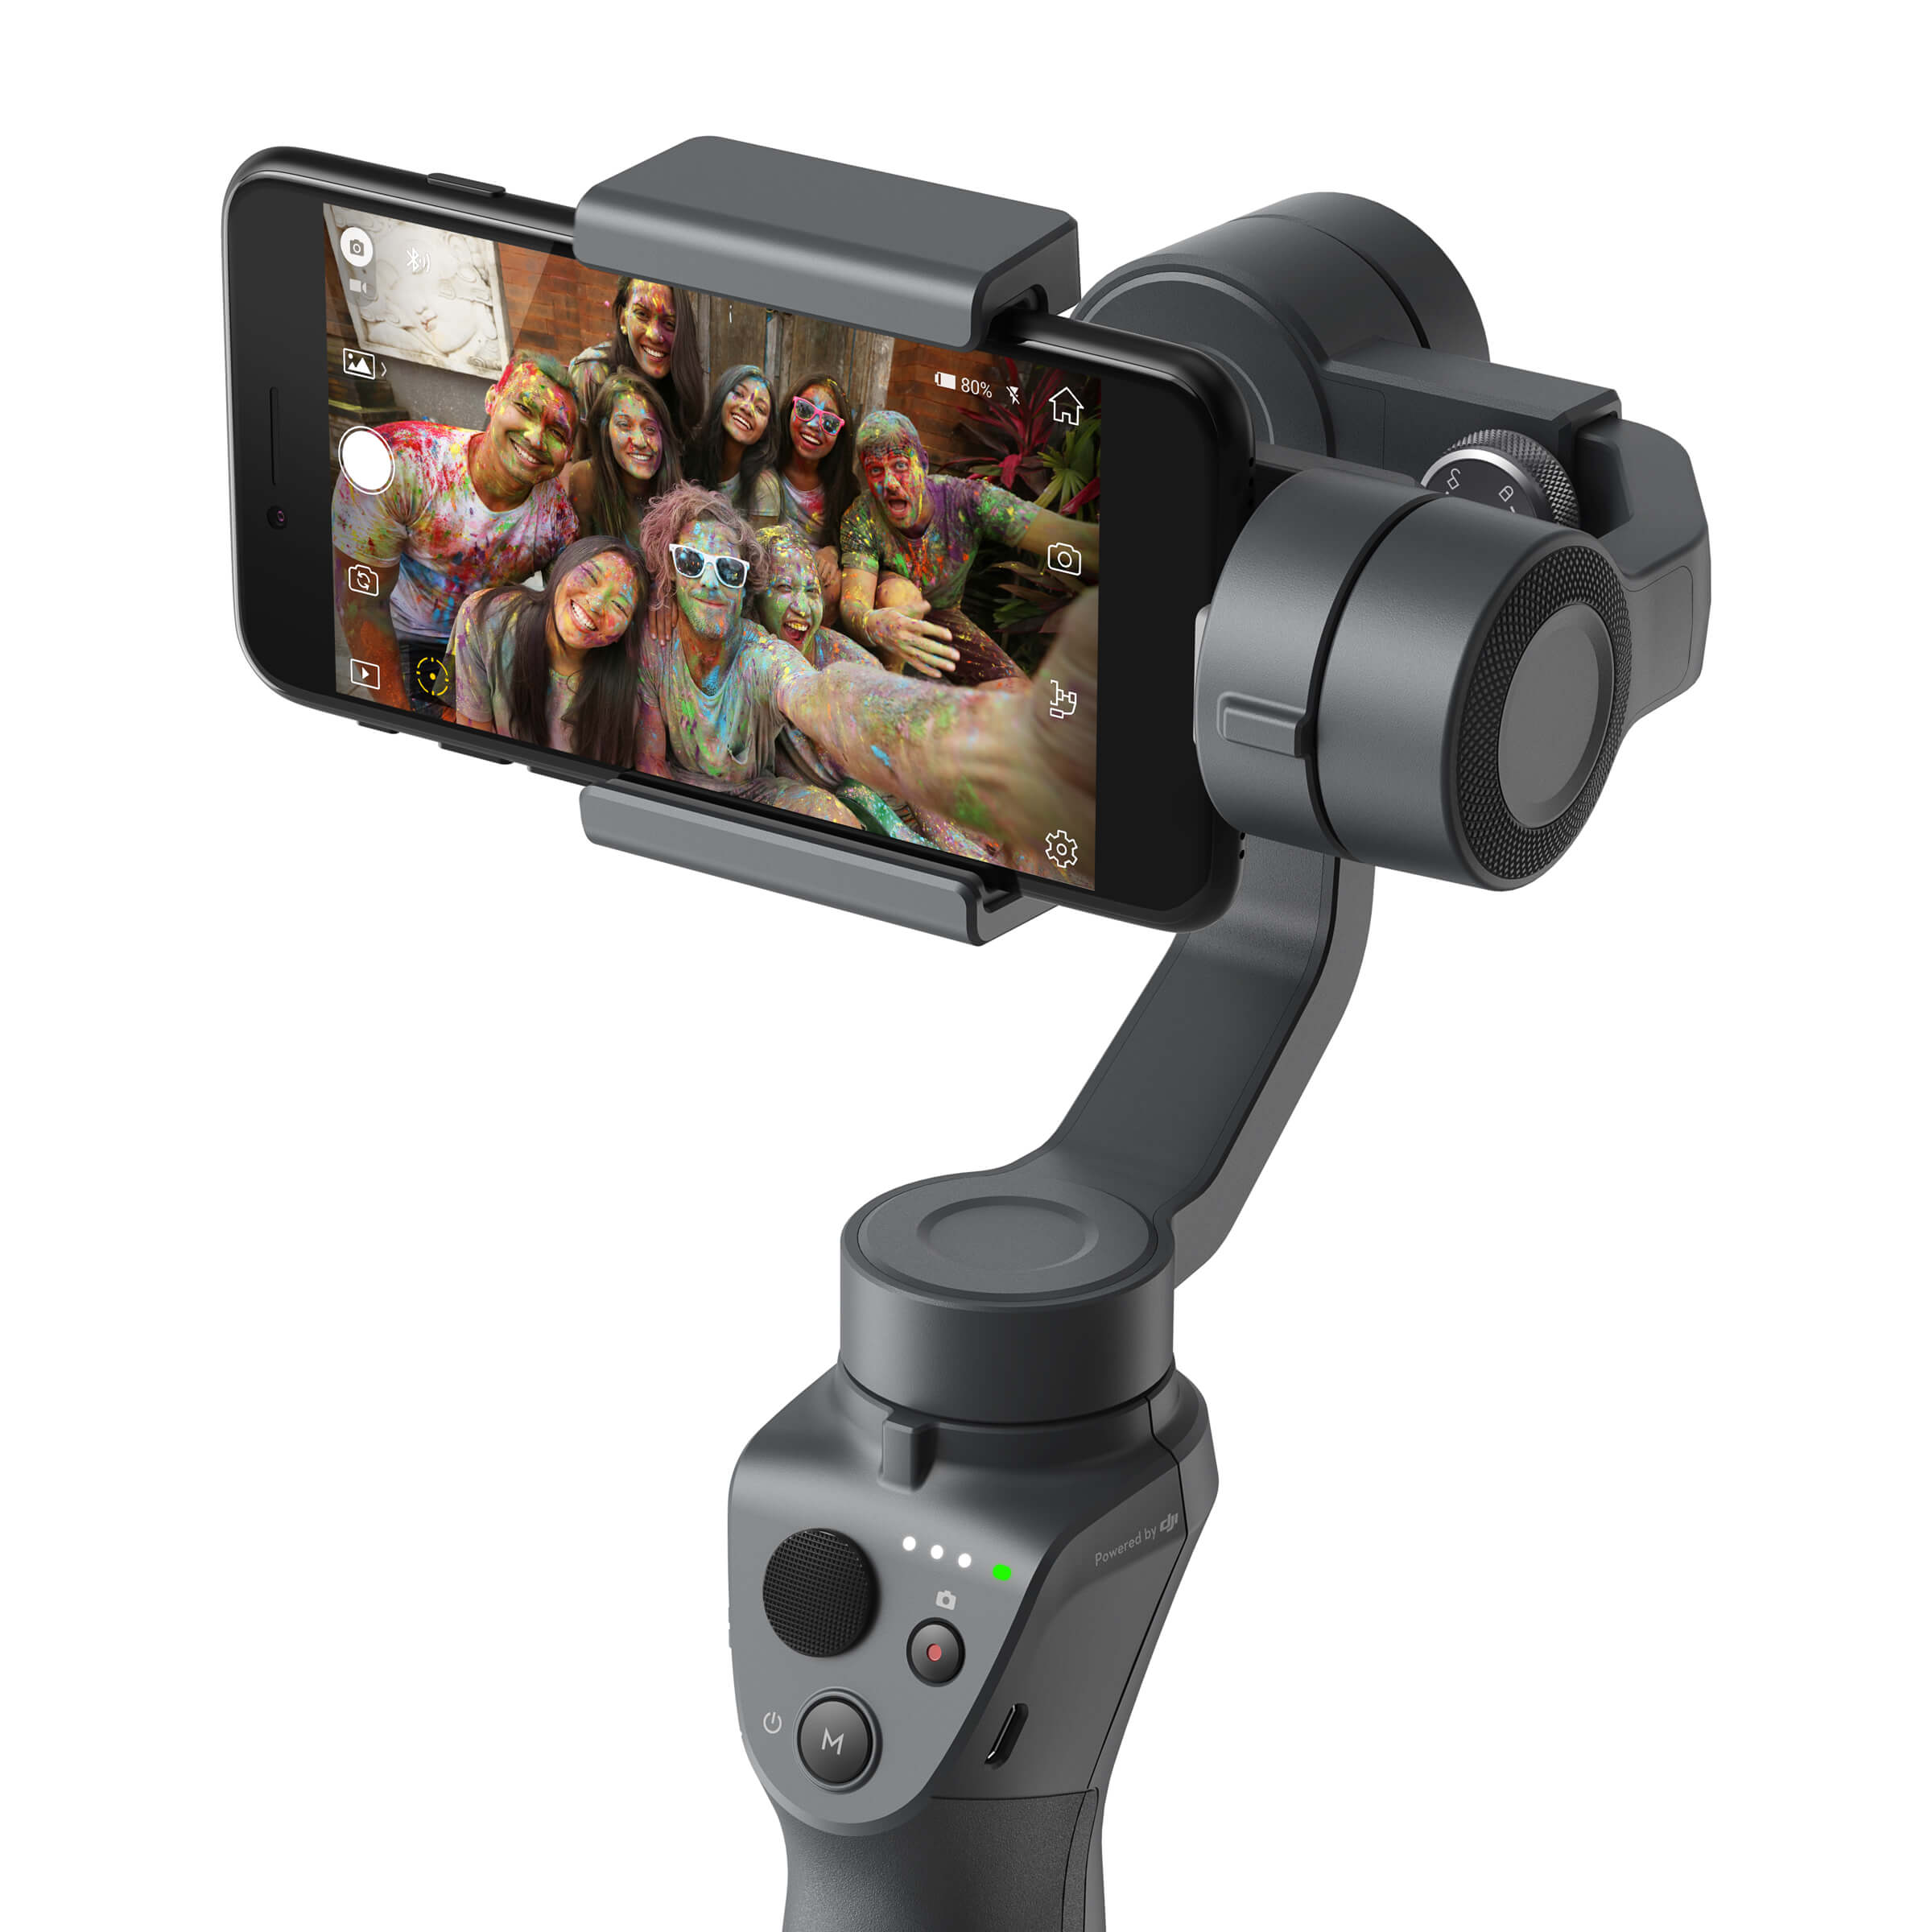 DJI Osmo Mobile 2 Now Available in PH: Priced at Only PhP7,900 – Gadget